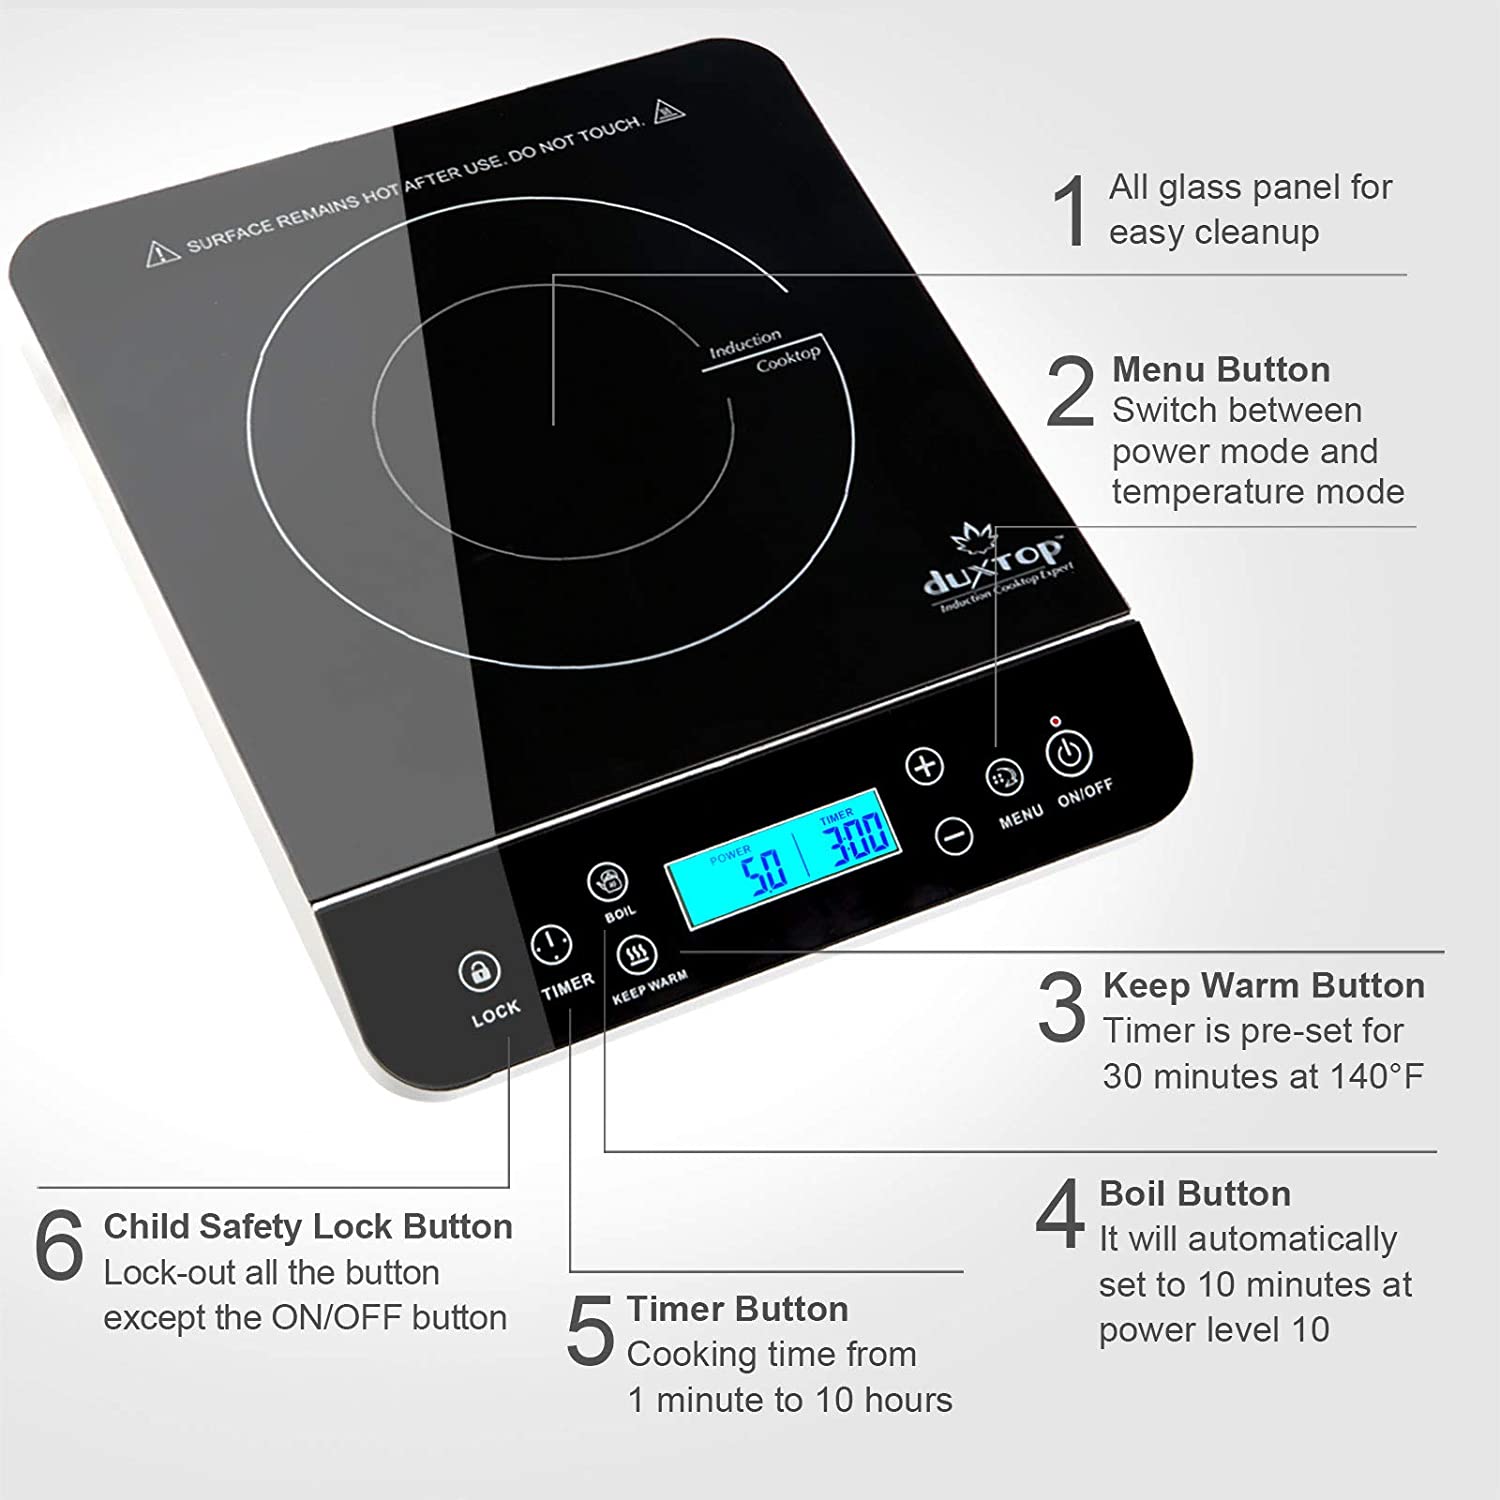 https://discounttoday.net/wp-content/uploads/2022/10/Duxtop-Portable-Induction-Cooktop-Countertop-Burner-Induction-Hot-Plate-with-LCD-Sensor-Touch-1800-Watts-Silver-9600LS-BT-200DZ3.jpg